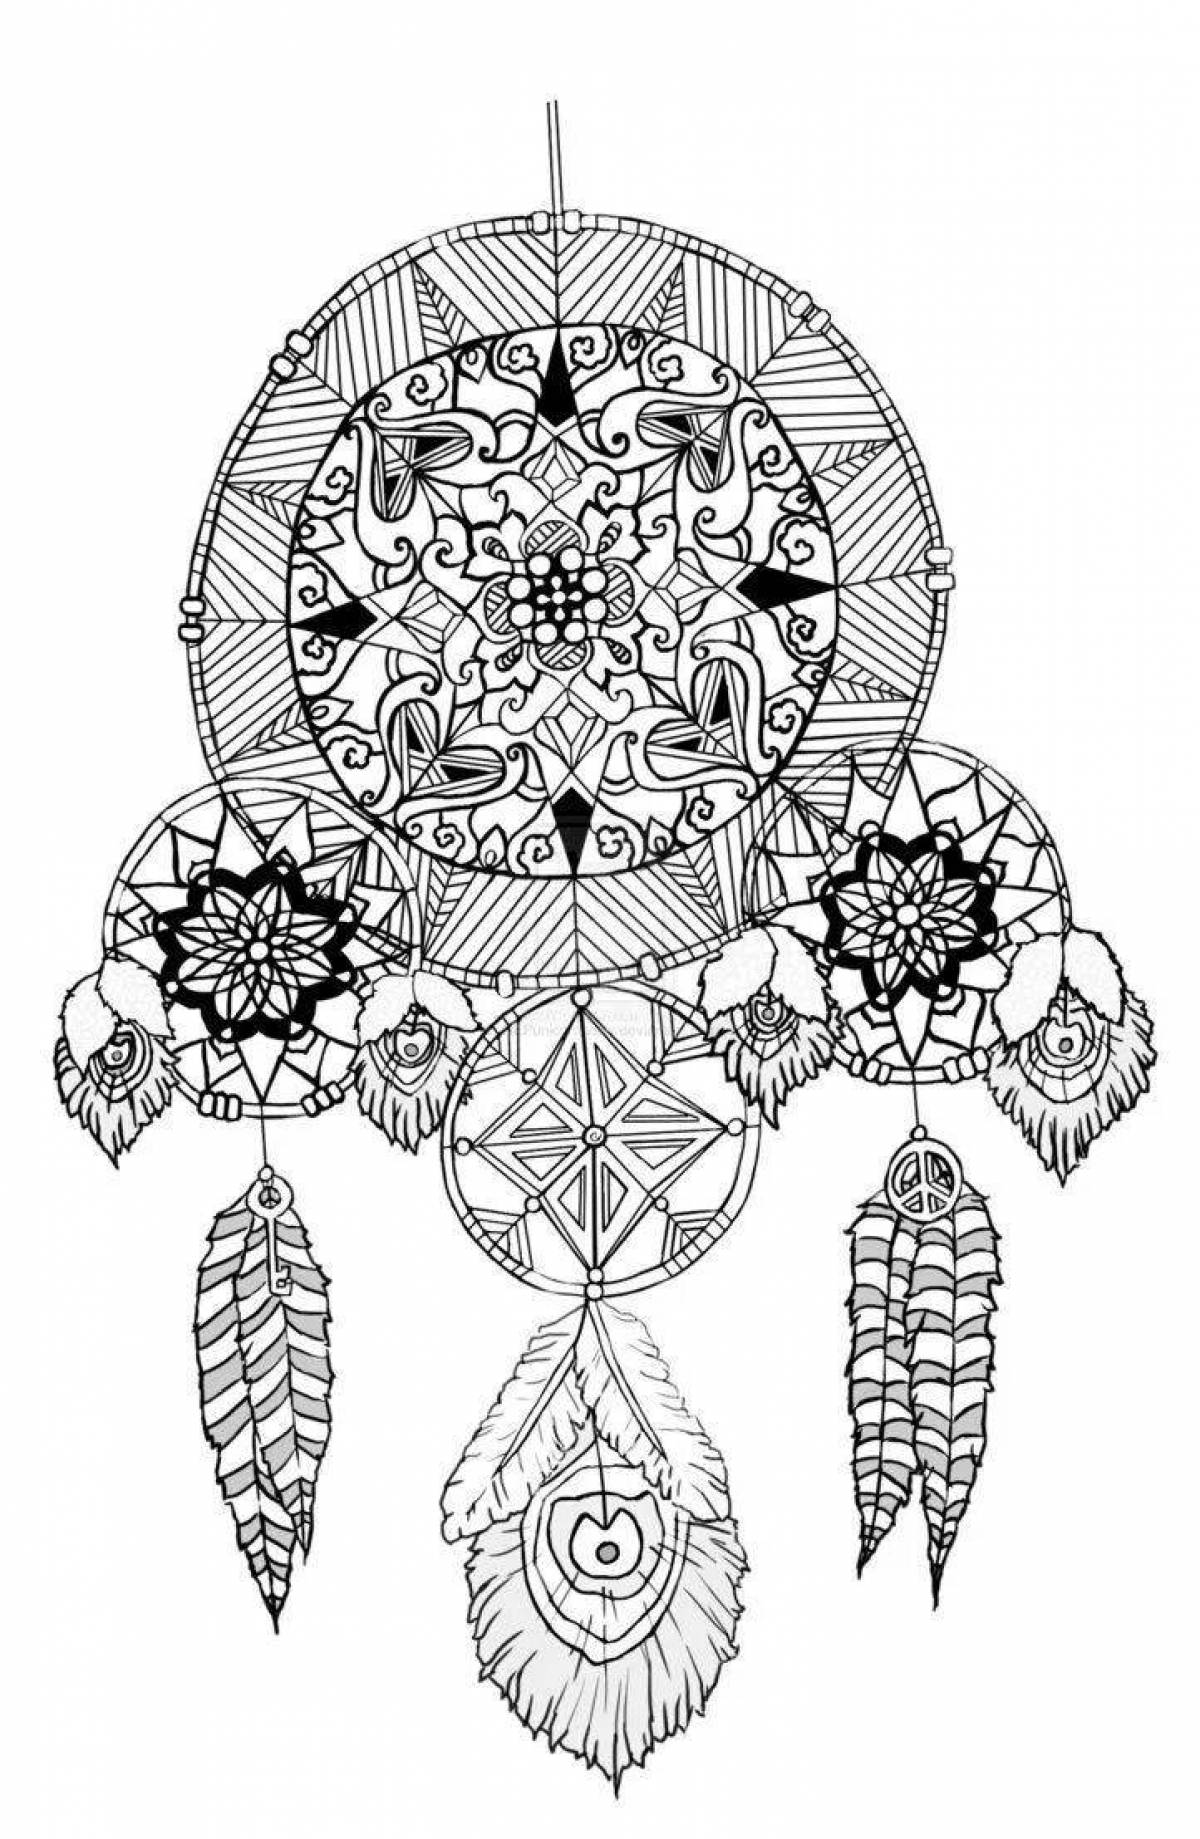 Decorated dreamcatcher coloring page